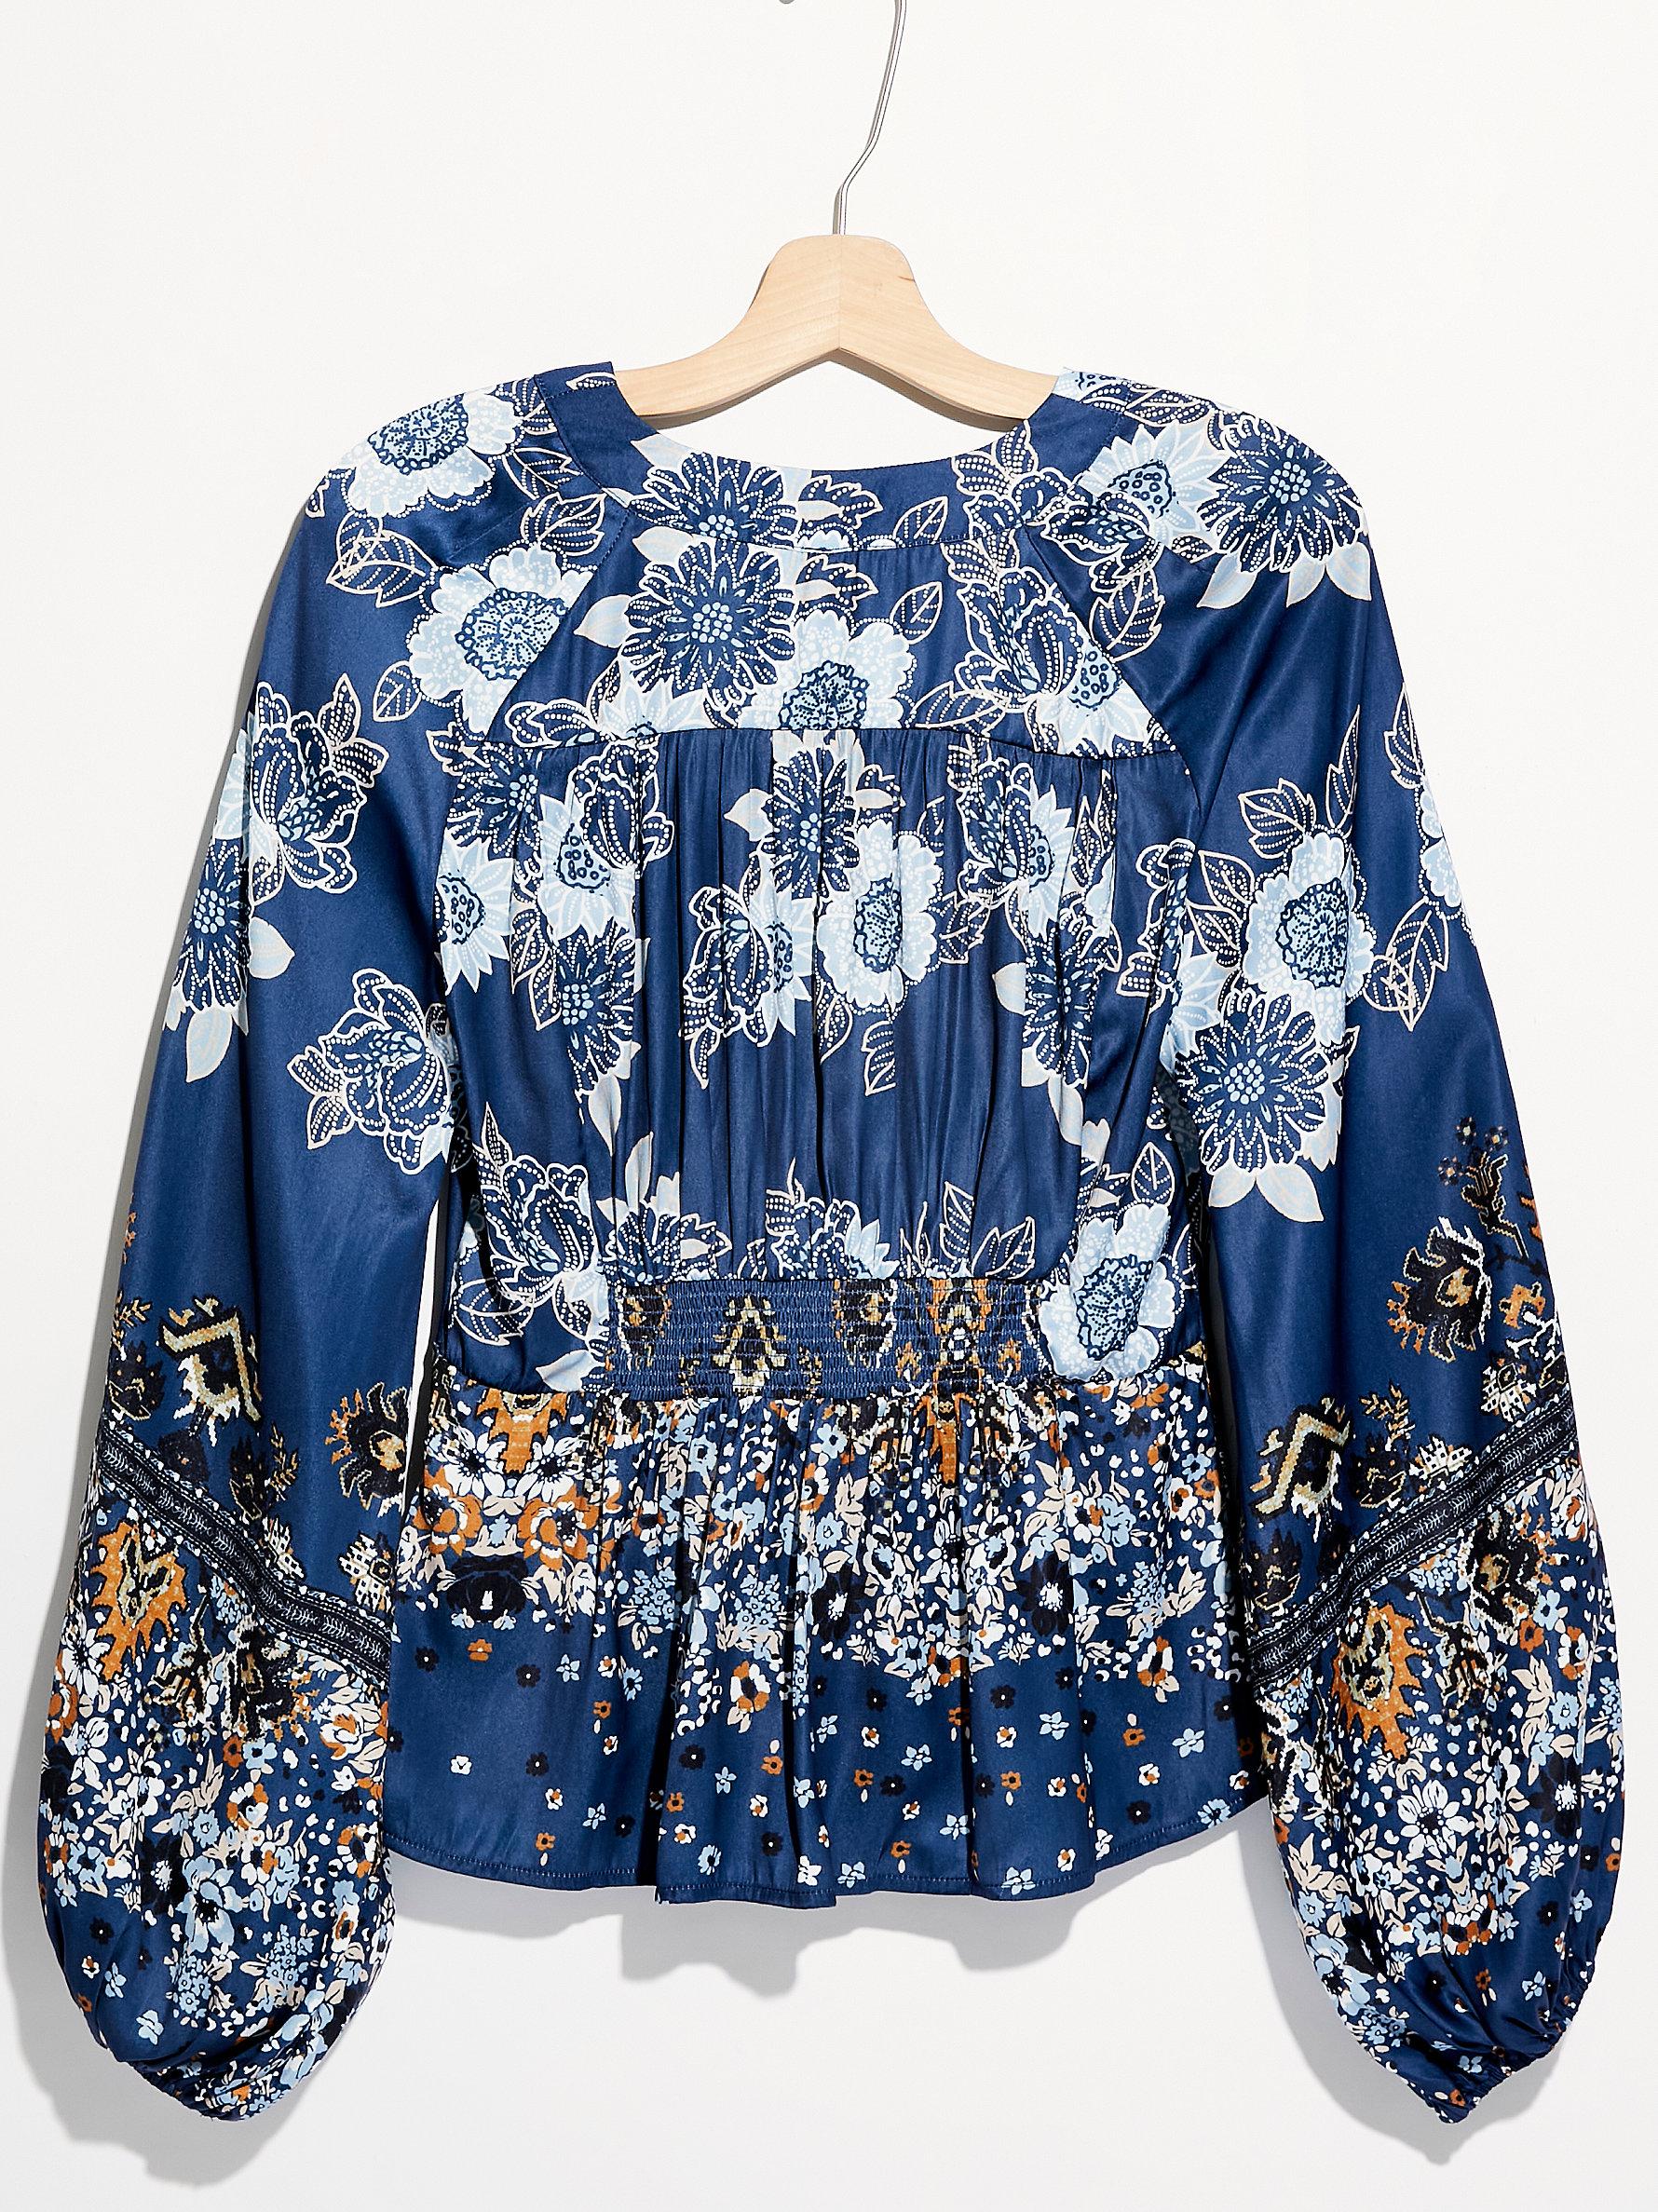 Free People Run Free Blouse in Navy Combo (Blue) - Lyst